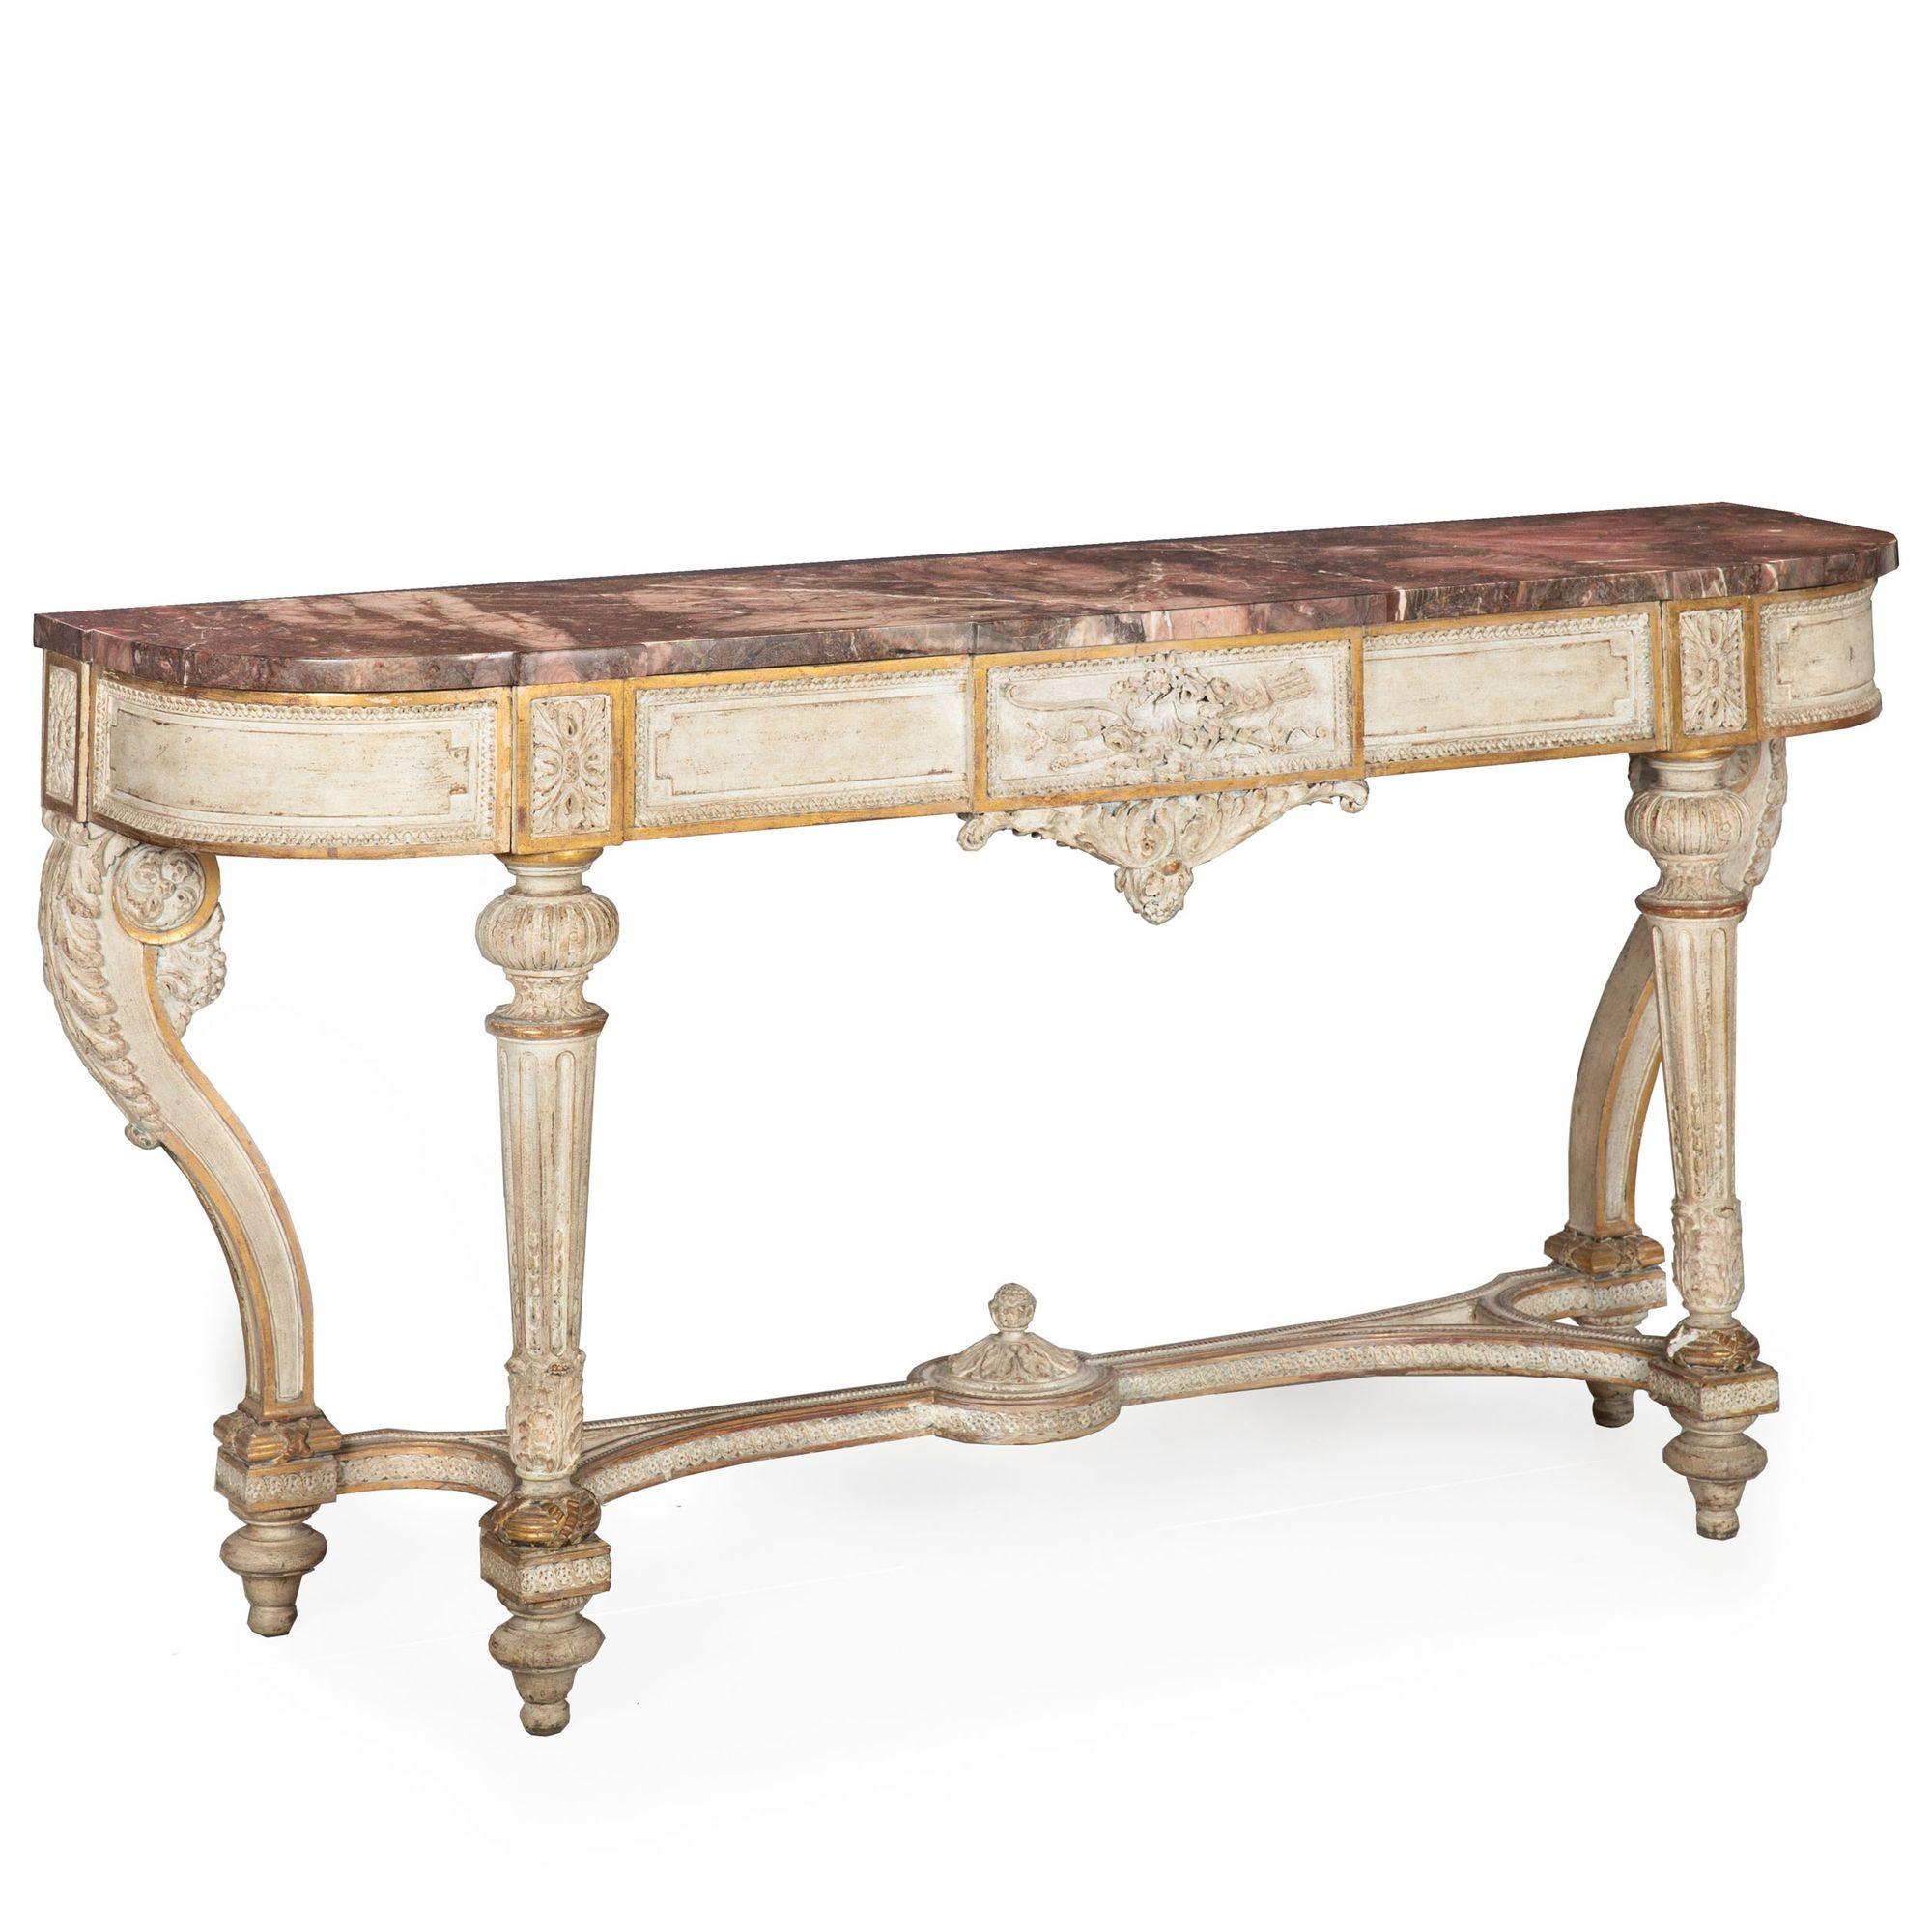 FRENCH LOUIS XVI CARVED WHITE-PAINTED PARCEL-GILT CONSOLE TABLE WITH VIOLET MARBLE TOP
Circa late 19th century
Item # 306YPZ14Q

A wonderful late 19th century carved console, the table notably retains the original and positively stunning violet